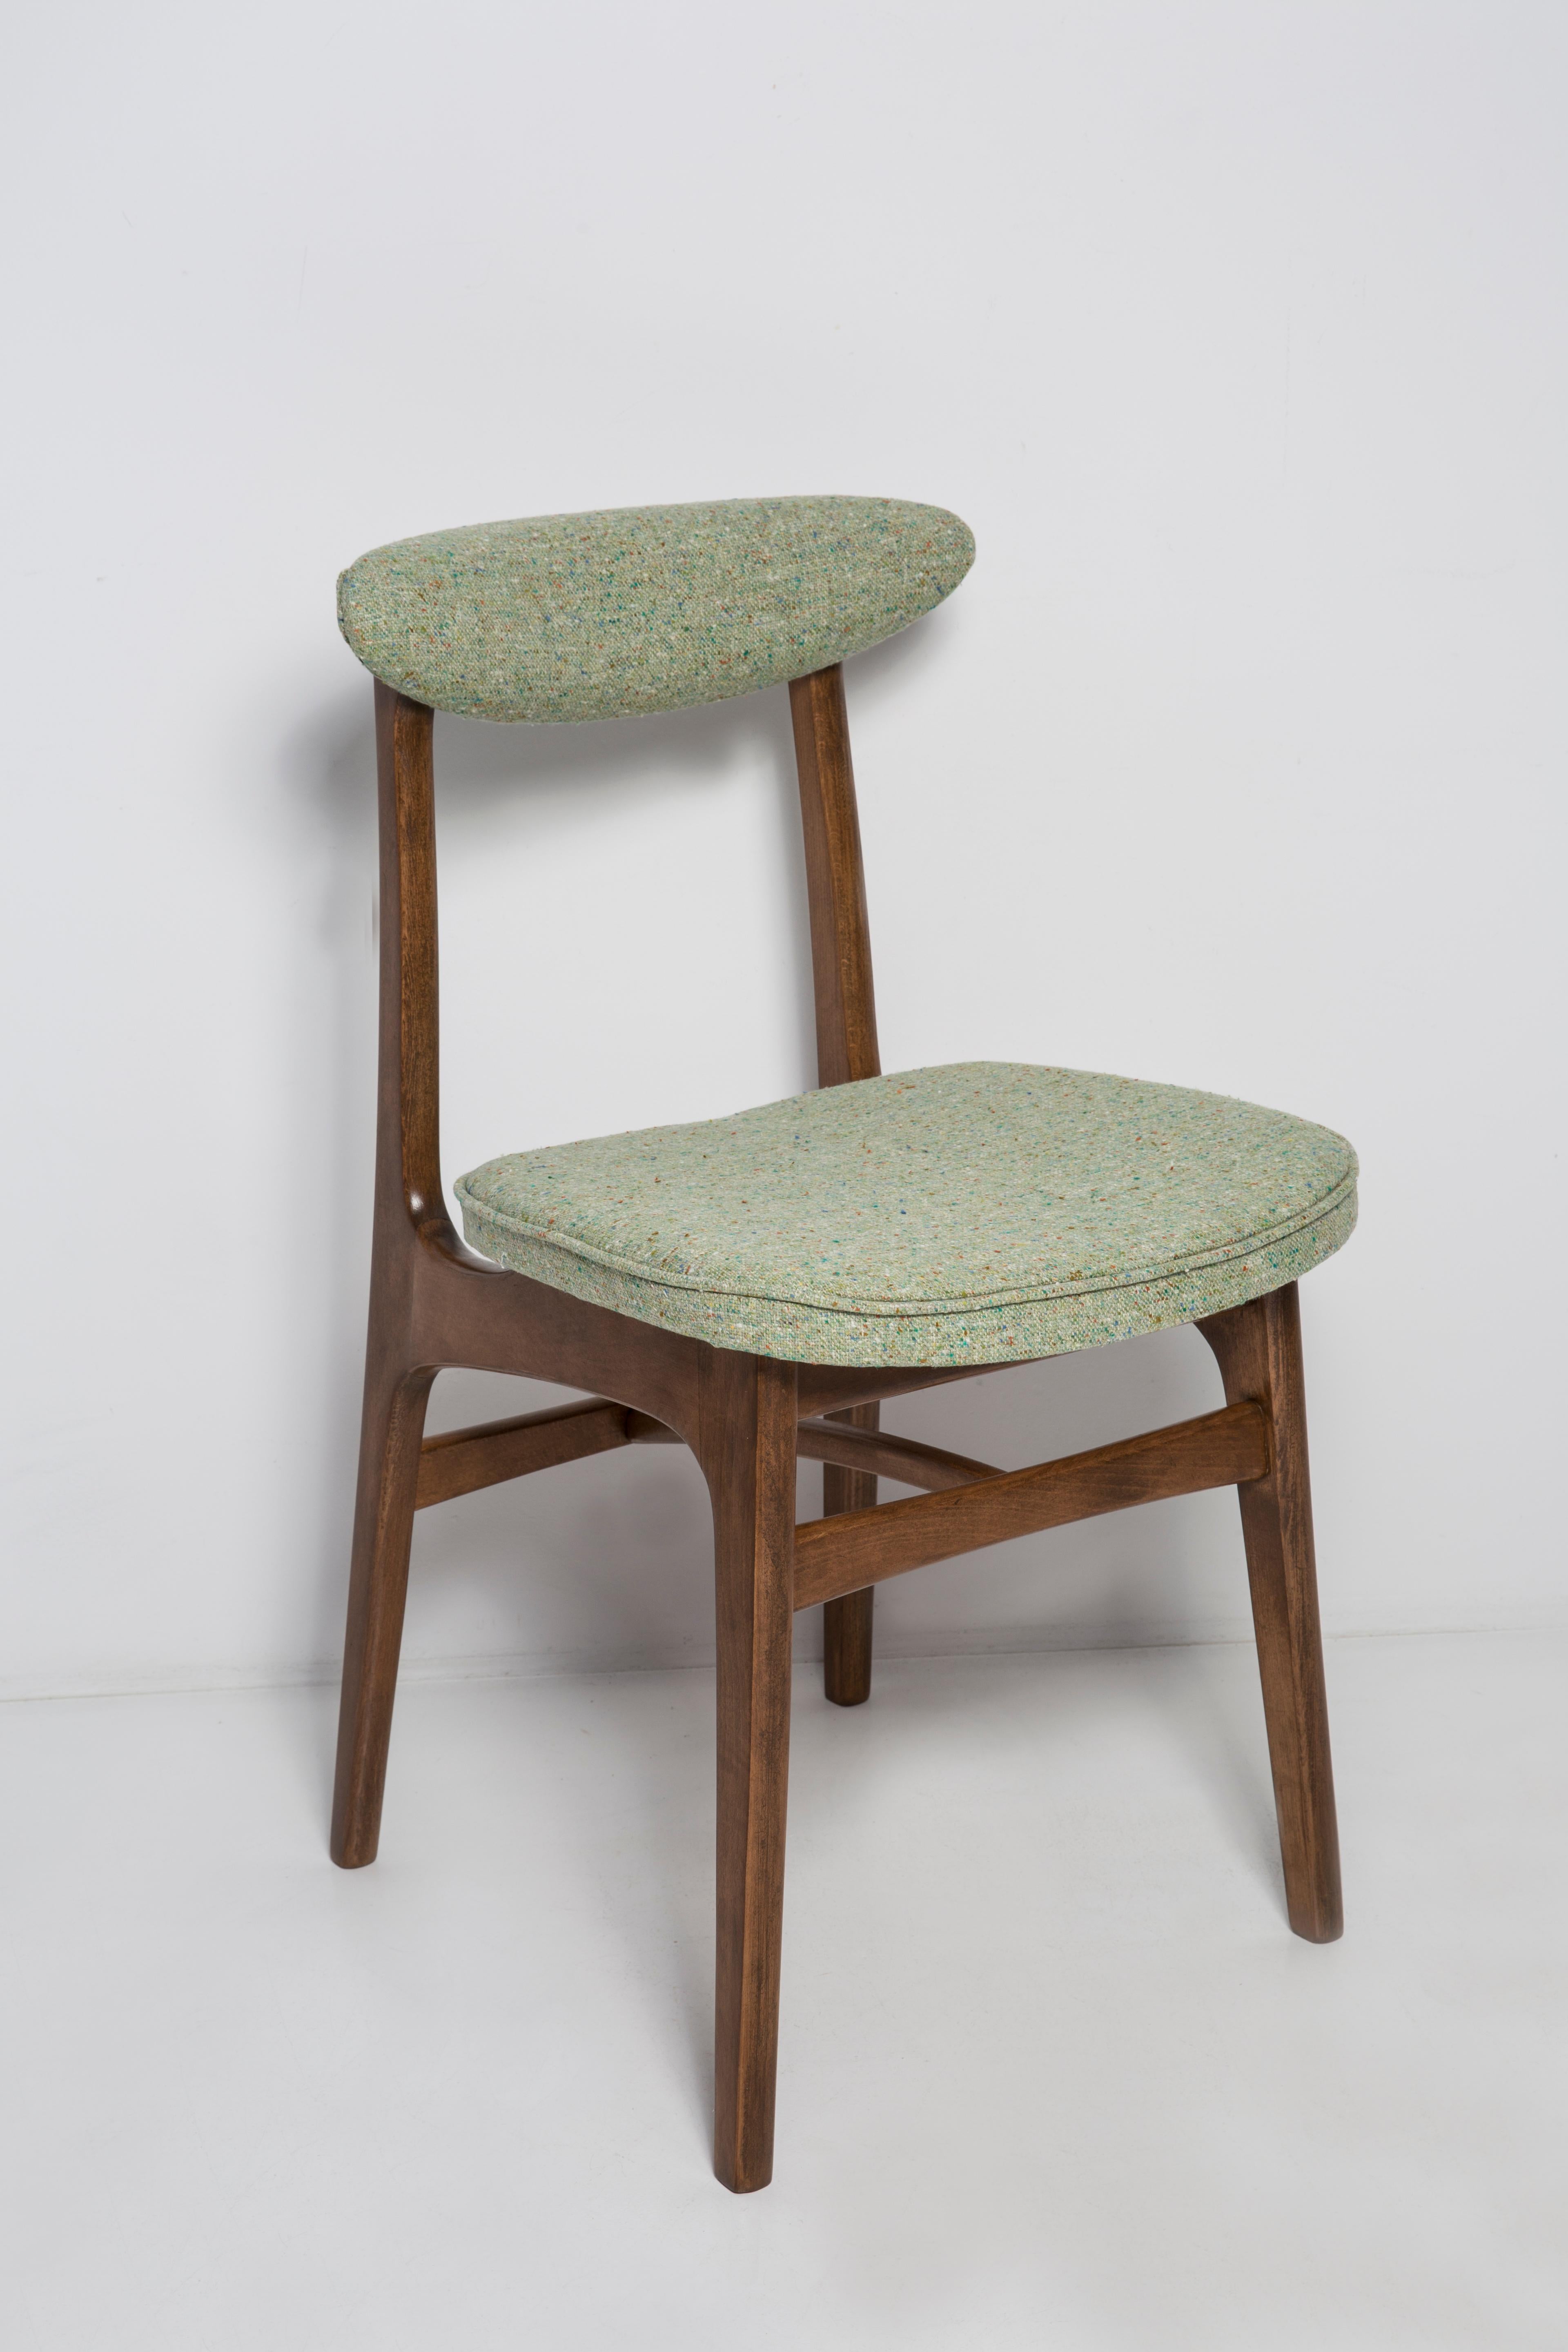 Chair designed by Prof. Rajmund Halas. Made of beechwood. Chair is after a complete upholstery renovation, the woodwork has been refreshed. Seat is dressed in apple green wool, durable and pleasant to the touch fabric. Chair is stable and very